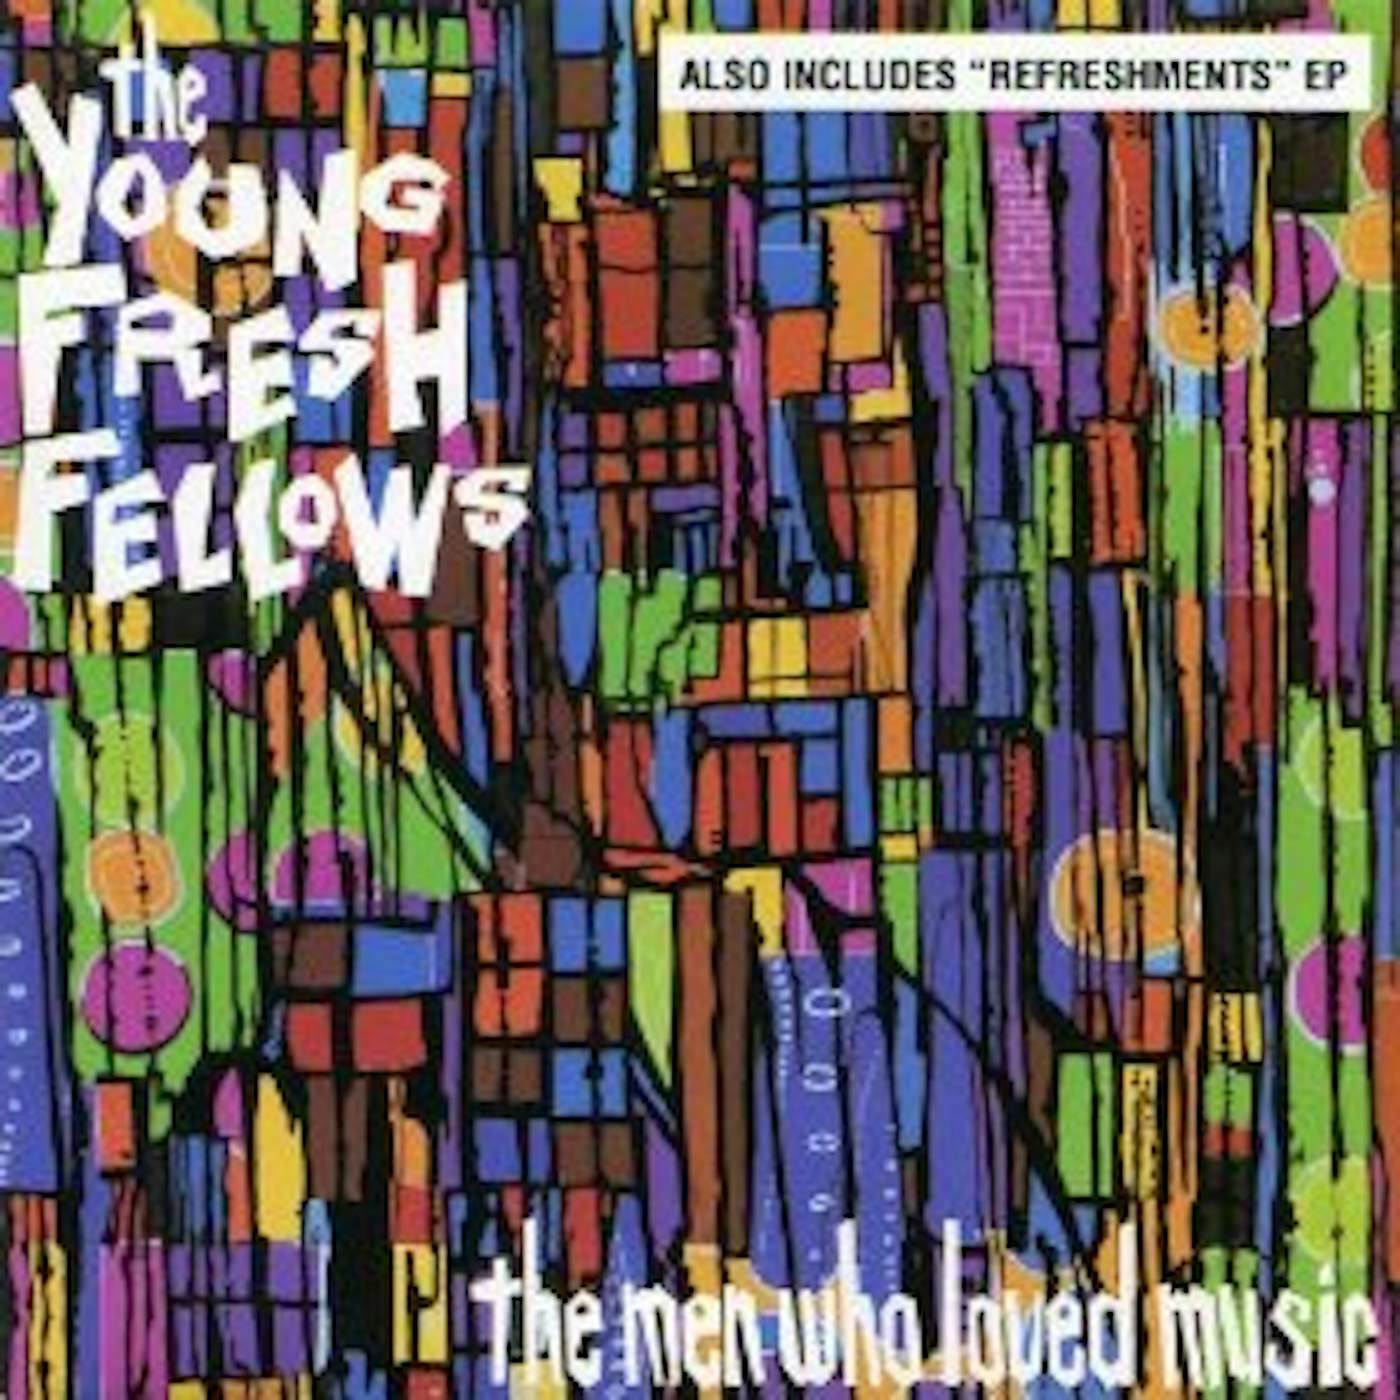 The Young Fresh Fellows MEN WHO LOVED MUSIC CD